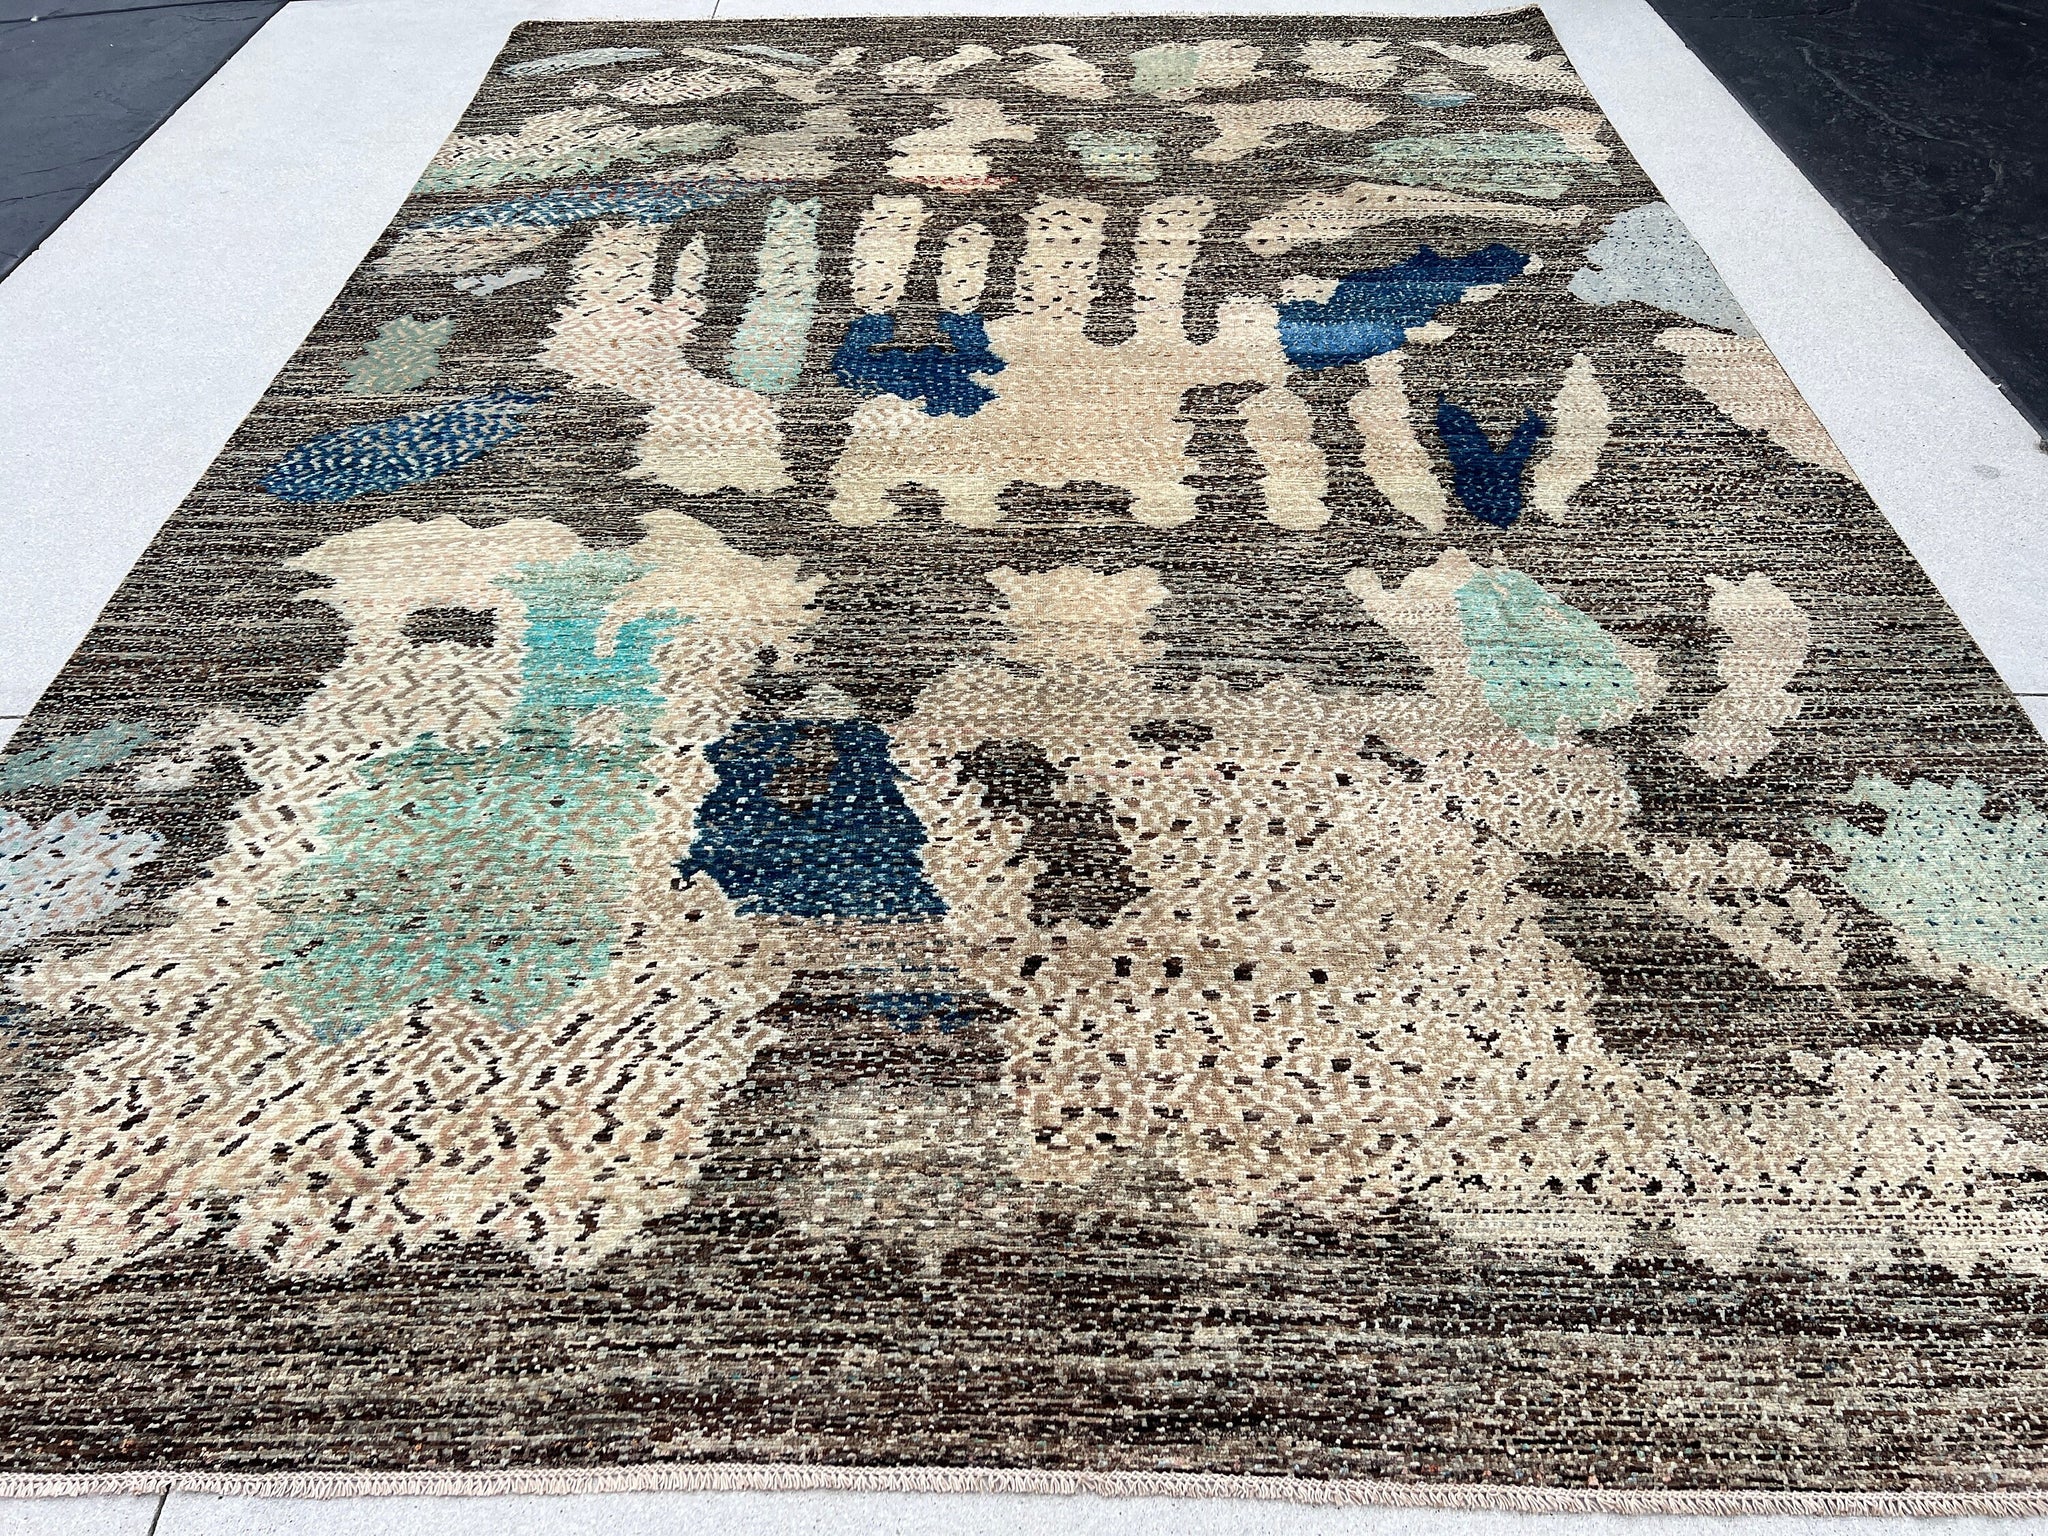 9x12 (270x365) Handmade Afghan Rug | Earth Tones Black Brown Beige Blue Turquoise Ivory Pink Teal Green Coral | Abstract Wool Modern Knotted